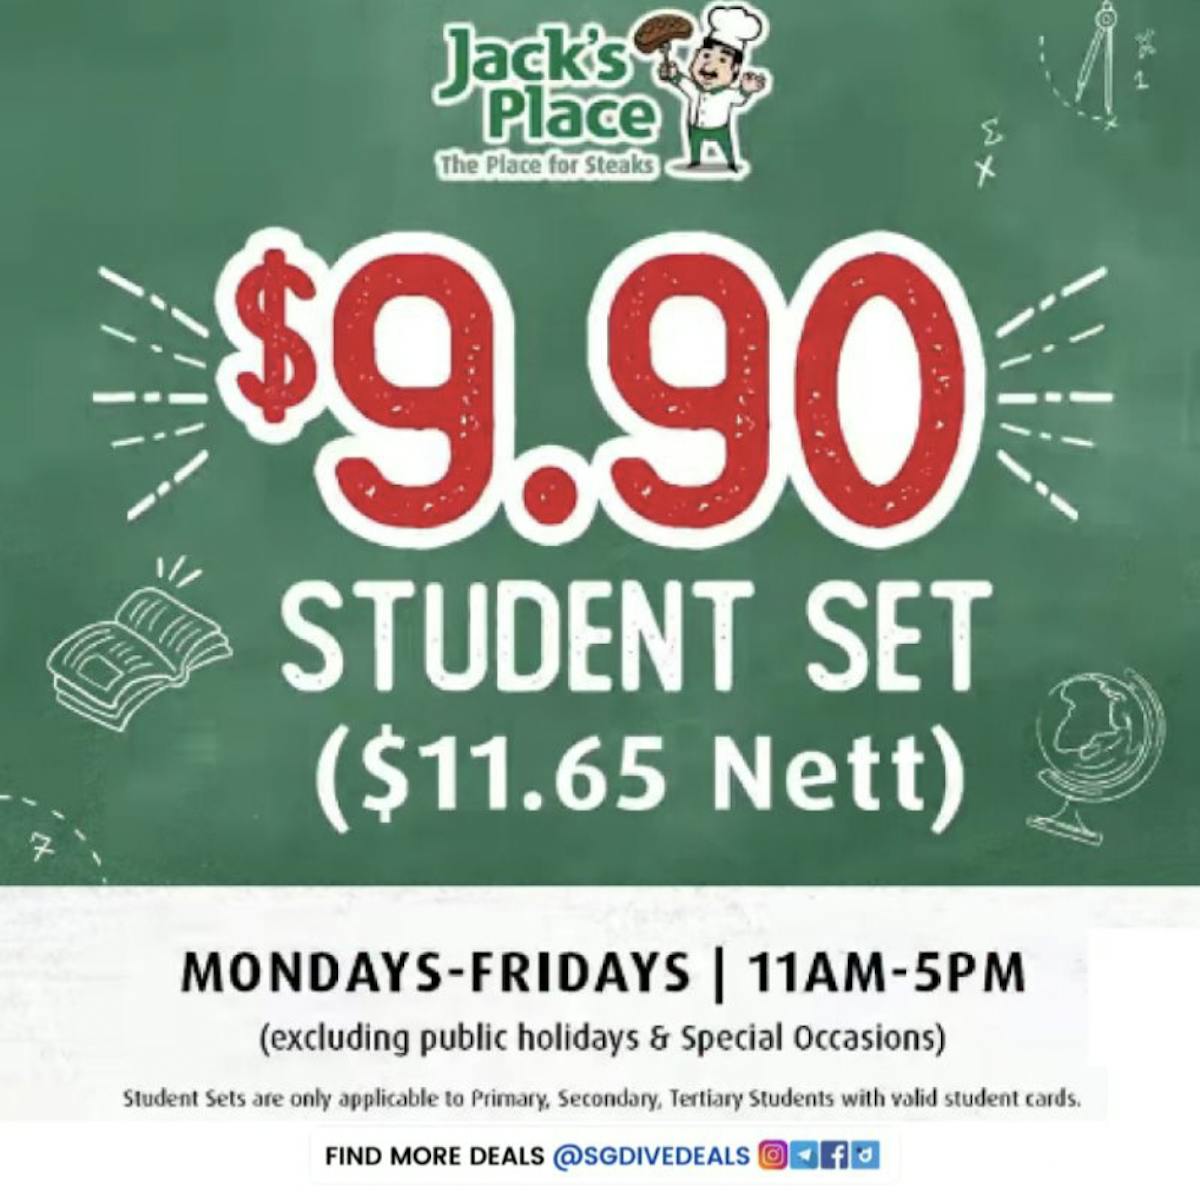 student sets at only $9.90++